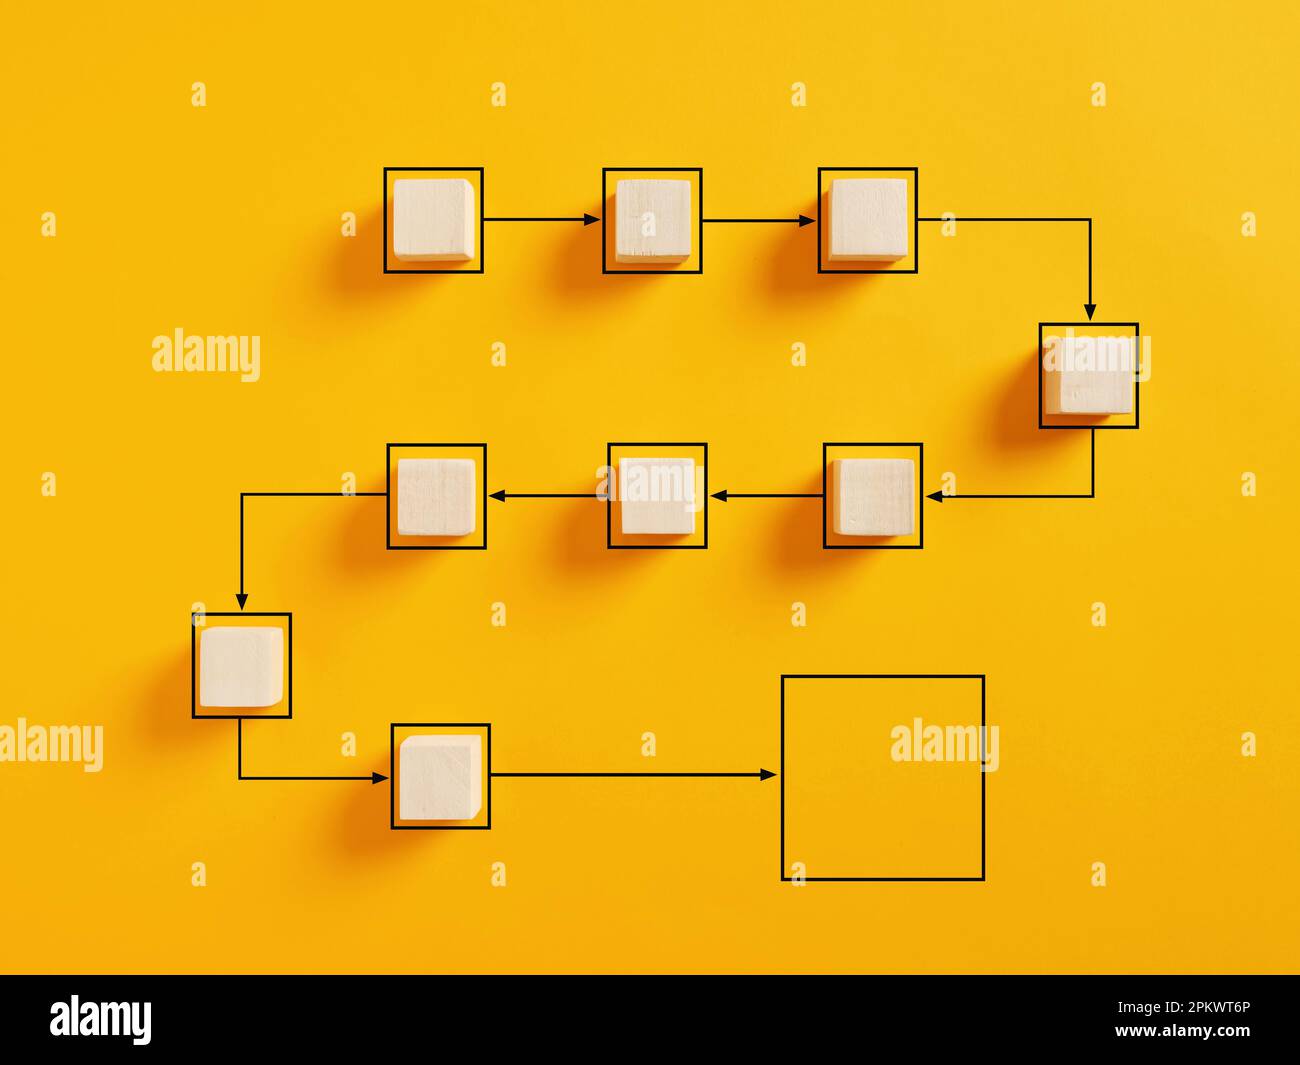 Business workflow and process automation flowchart. Wooden cube blocks representing work process management on yellow background Stock Photo